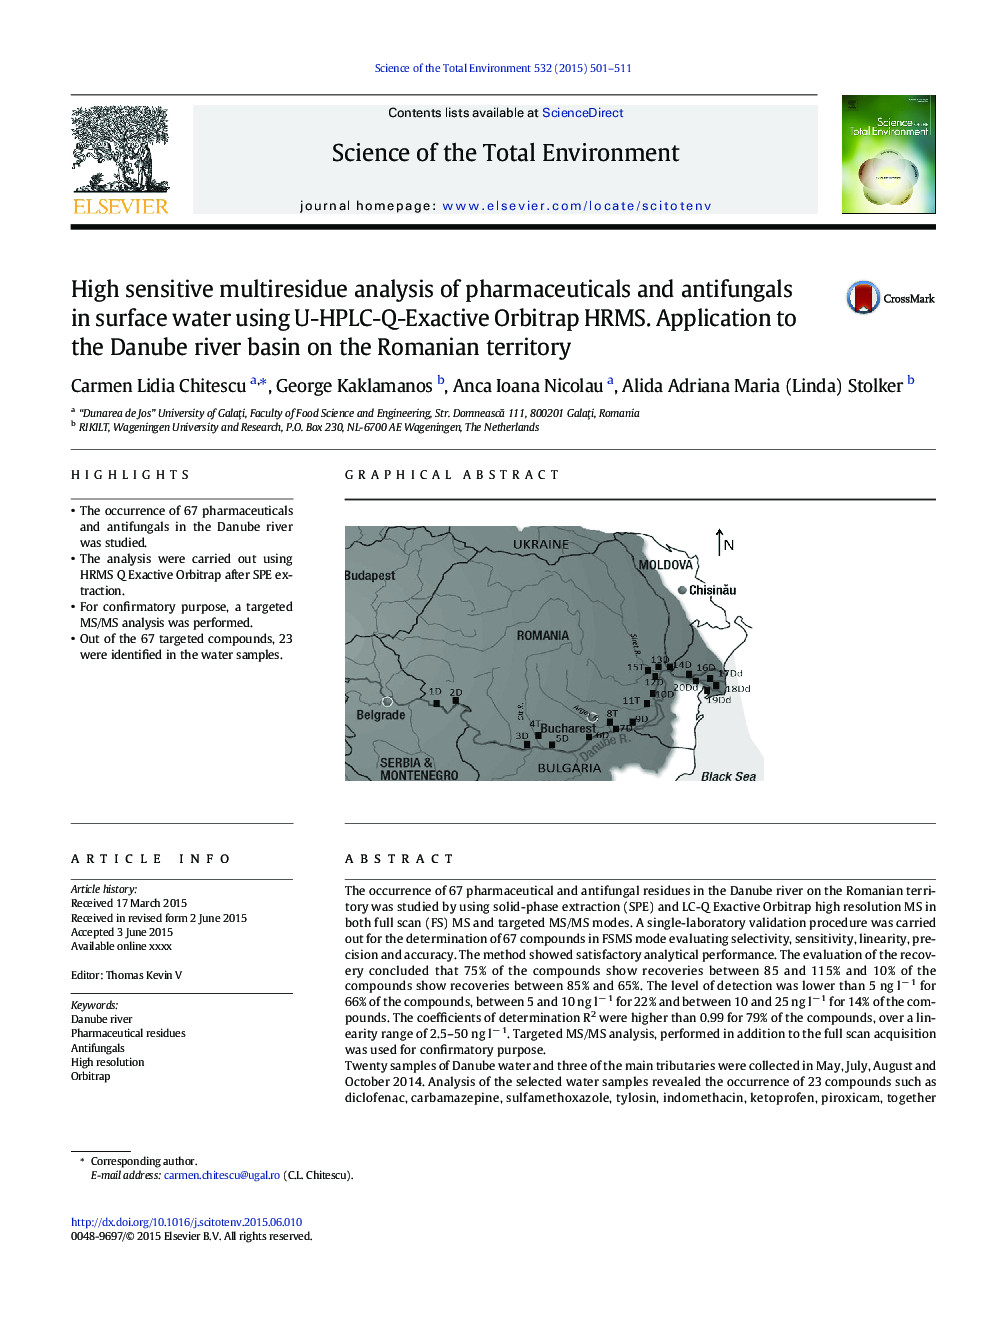 High sensitive multiresidue analysis of pharmaceuticals and antifungals in surface water using U-HPLC-Q-Exactive Orbitrap HRMS. Application to the Danube river basin on the Romanian territory